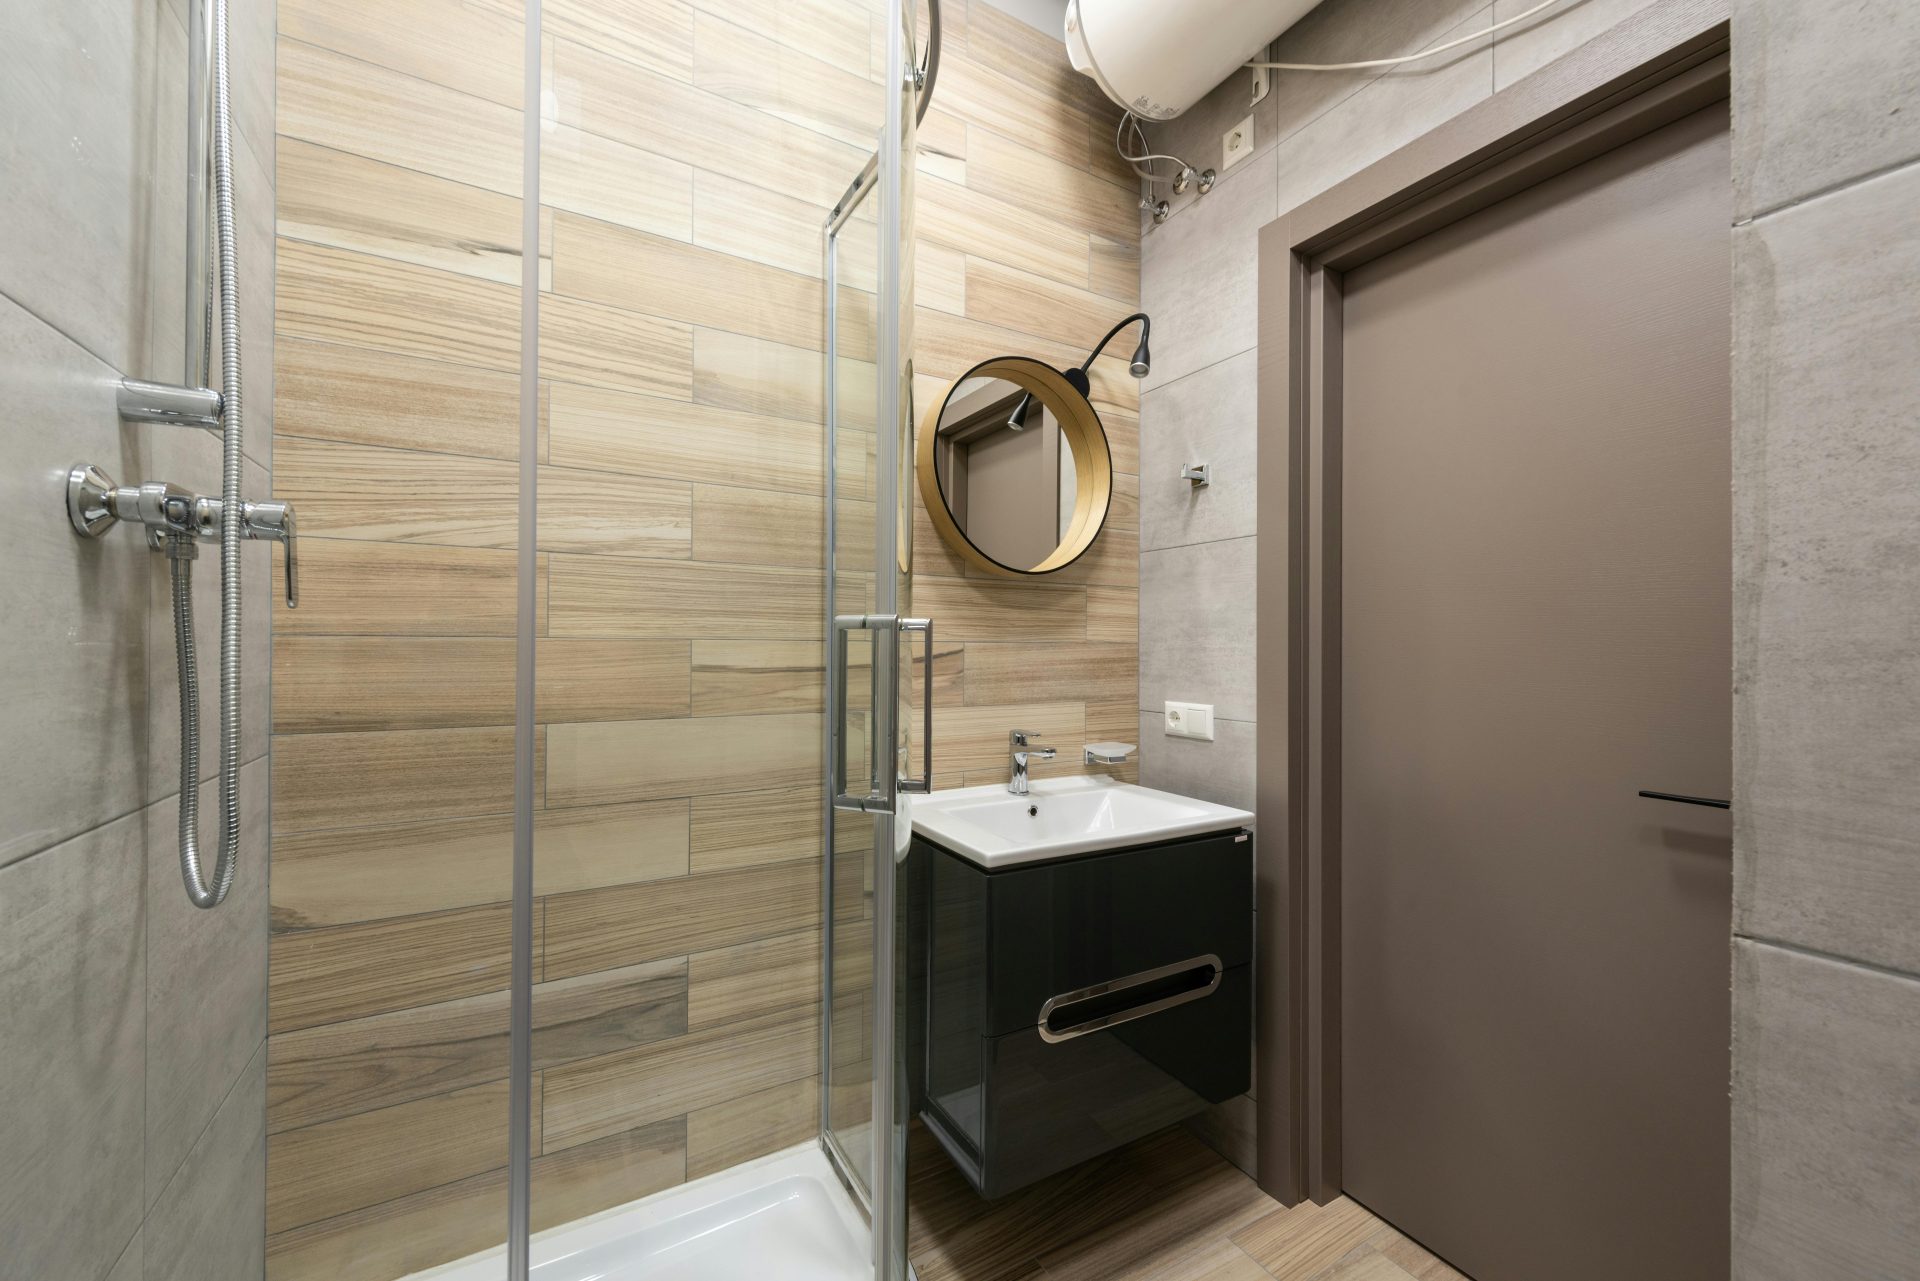 Planning and Design Considerations for Small Bathrooms